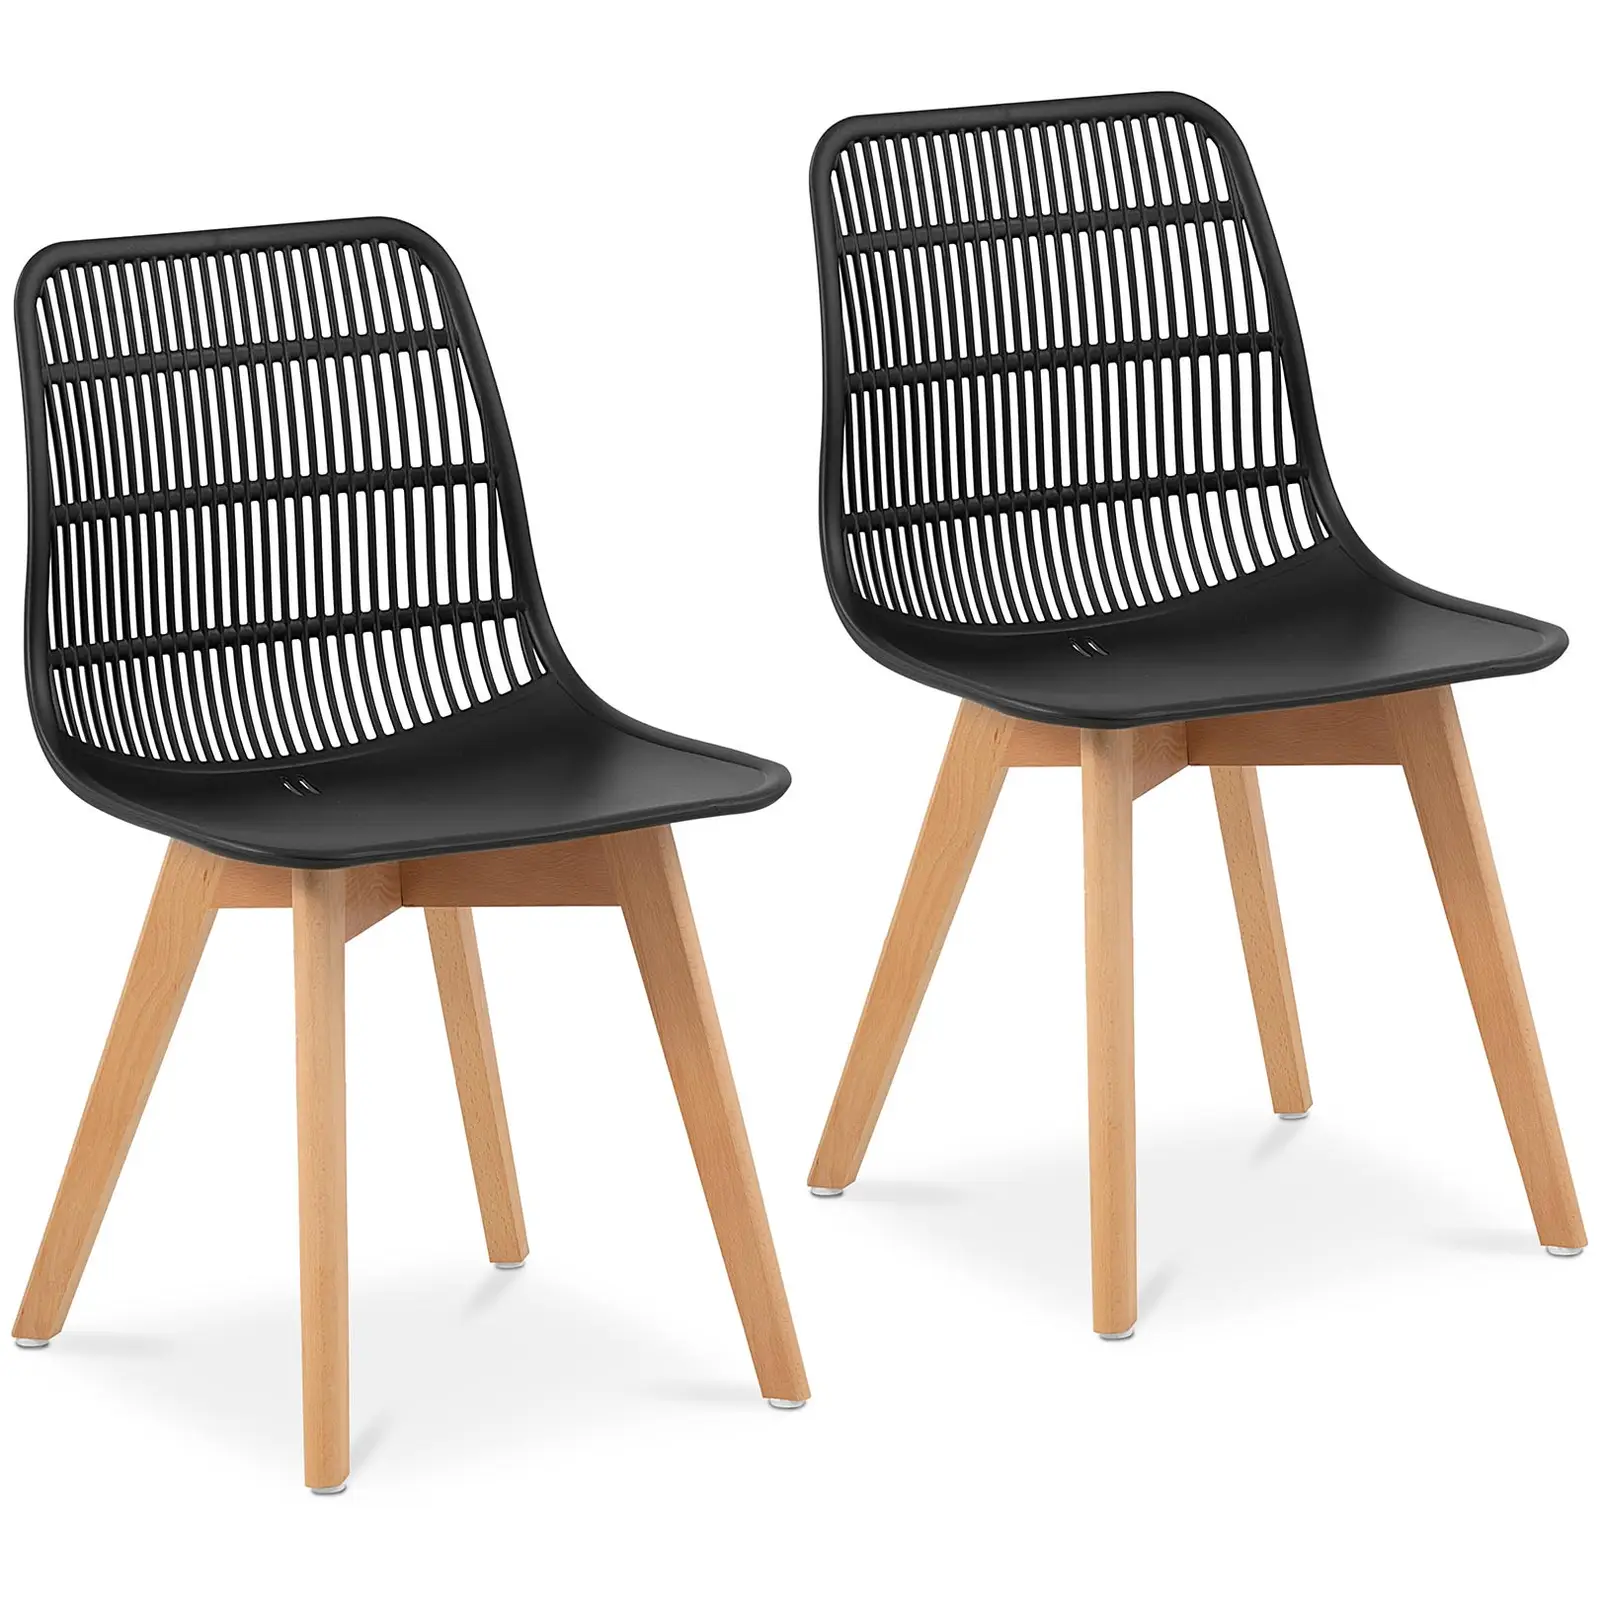 Chair - set of 2 - up to 150 kg - seat area 460x460x450 mm - 